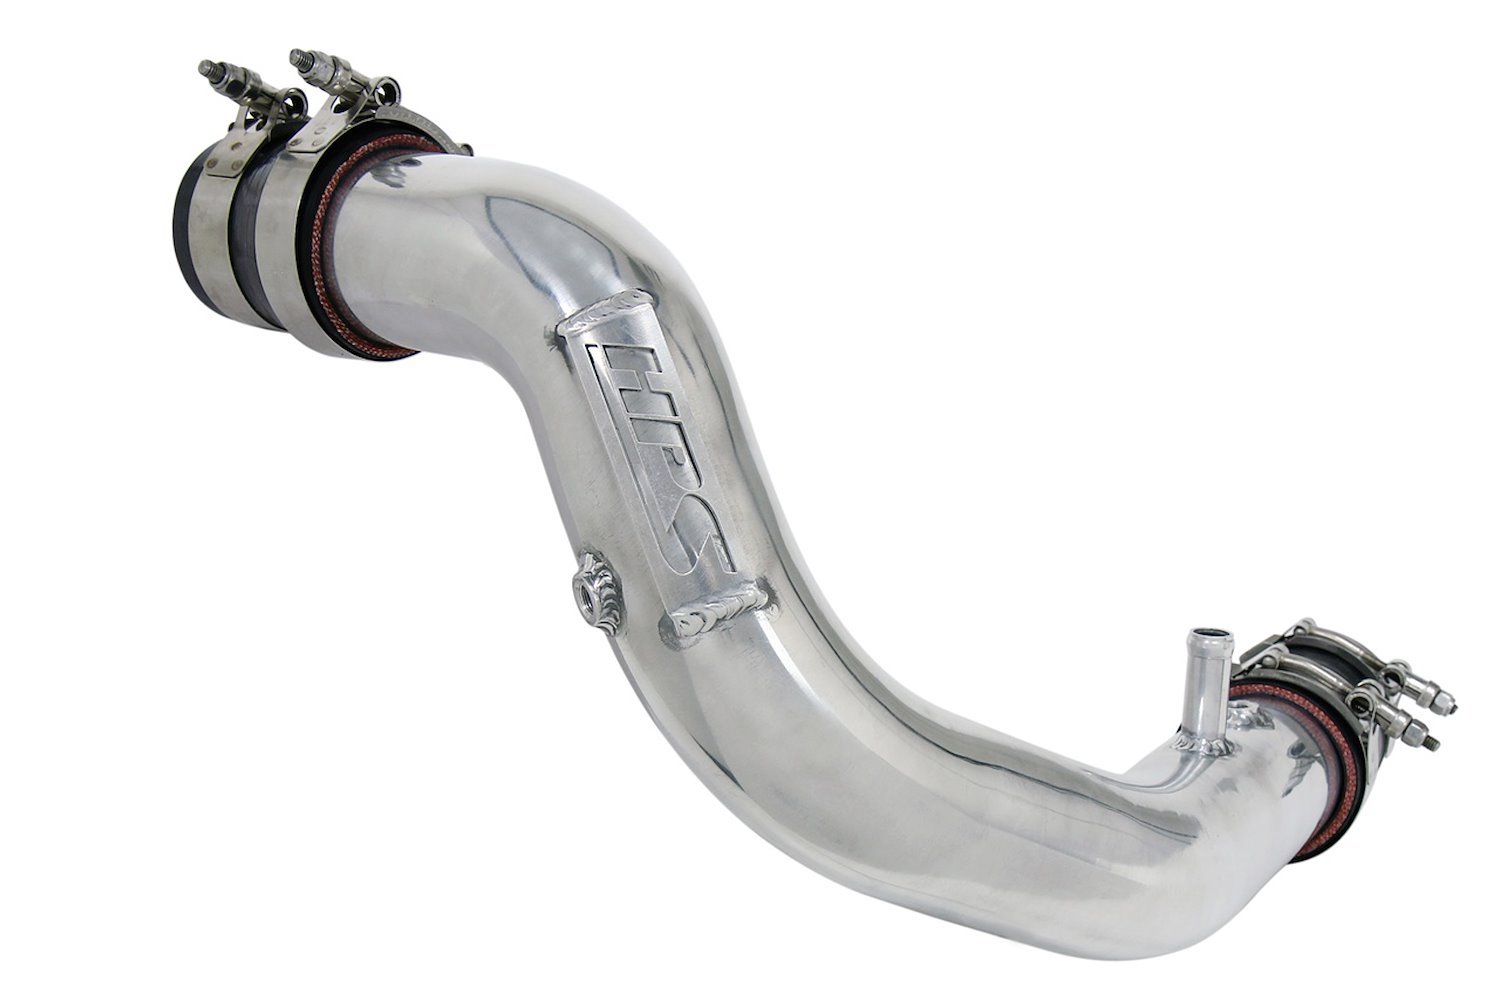 17-122P Turbo Charge Pipe Kit, Dyno Proven +6.6 HP, +9.1 TQ, Reduce Turbo Lag, 2.5 in. Pipe